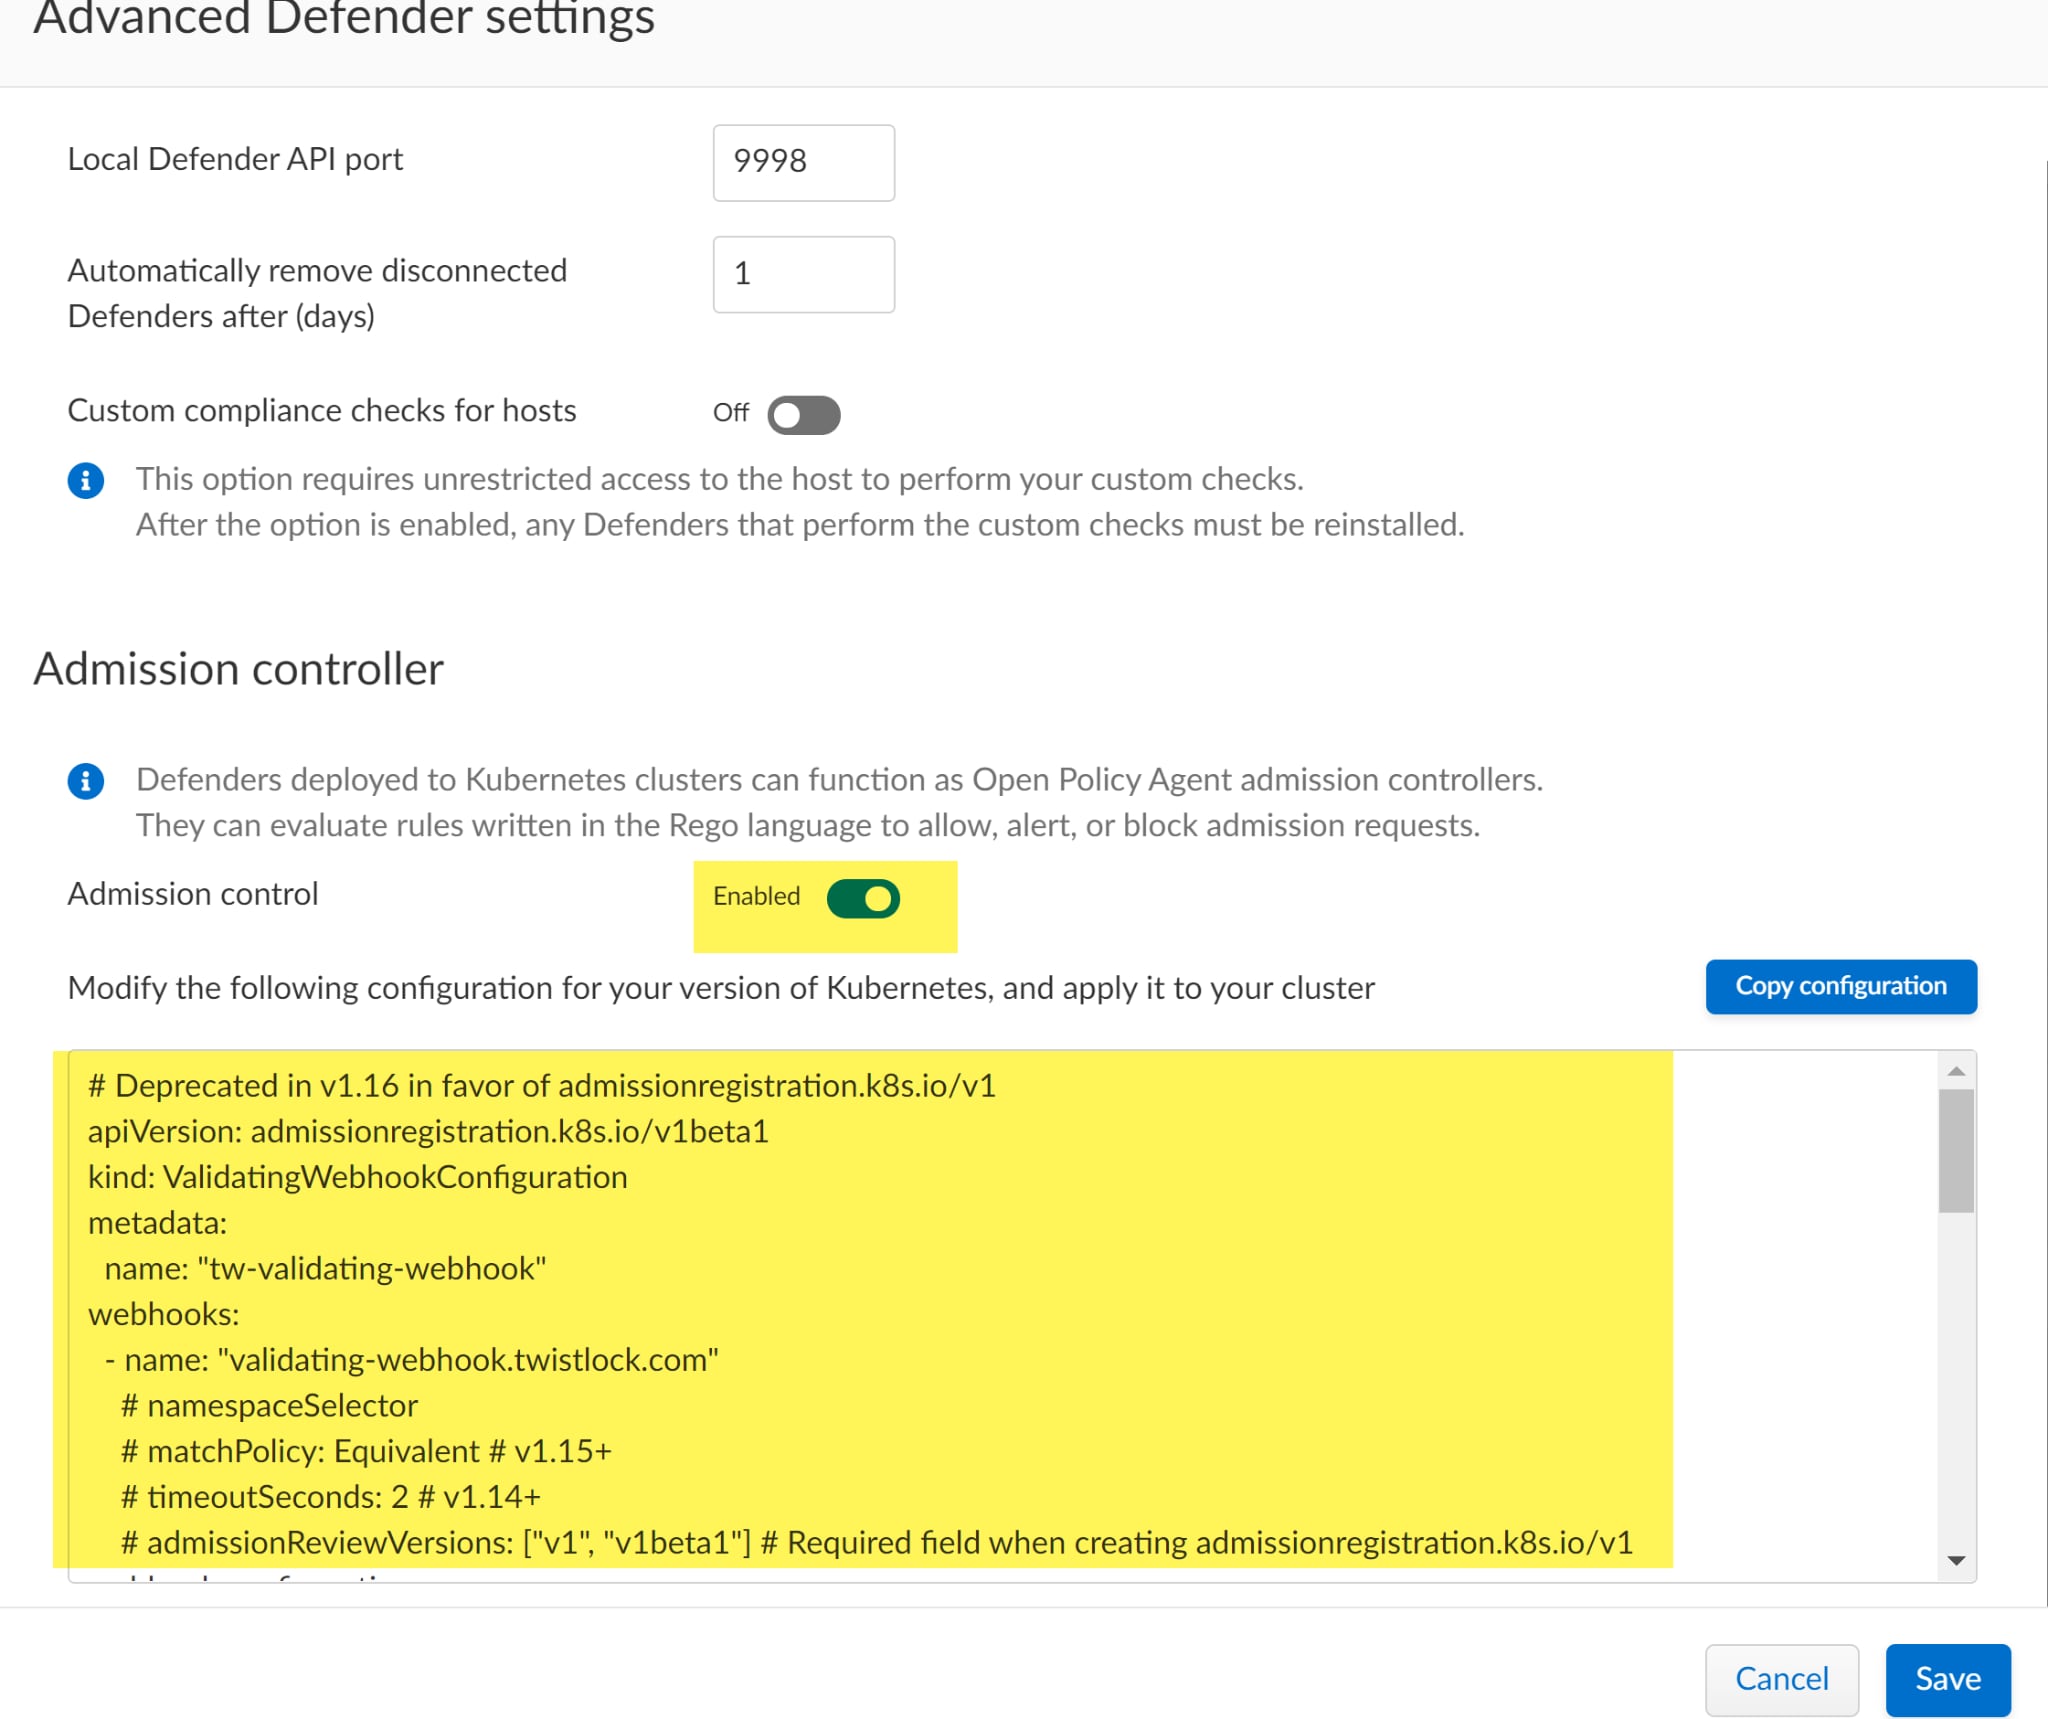 Enable admission controller in the Advanced Defender settings